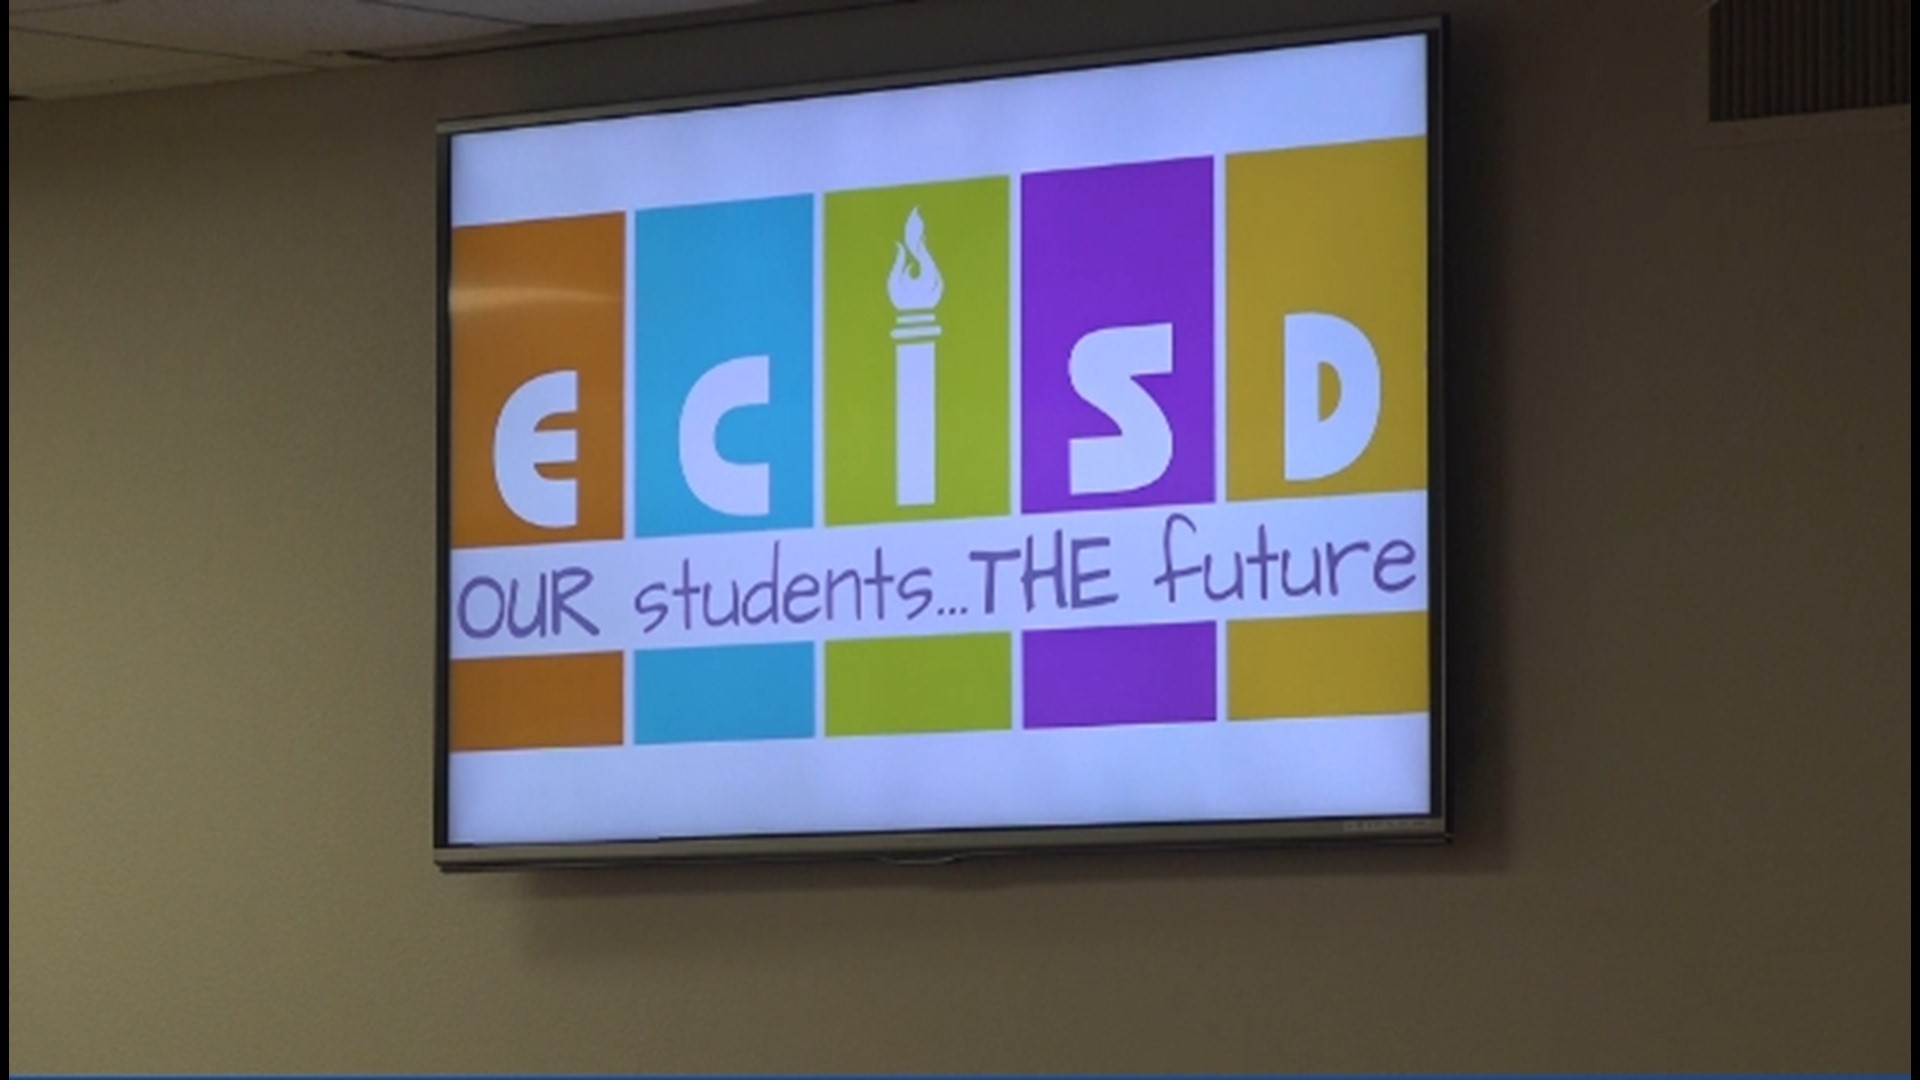 Both the Disability Rights Texas attorney and a parent hope change comes to ECISD to provide better education for students with disabilities.